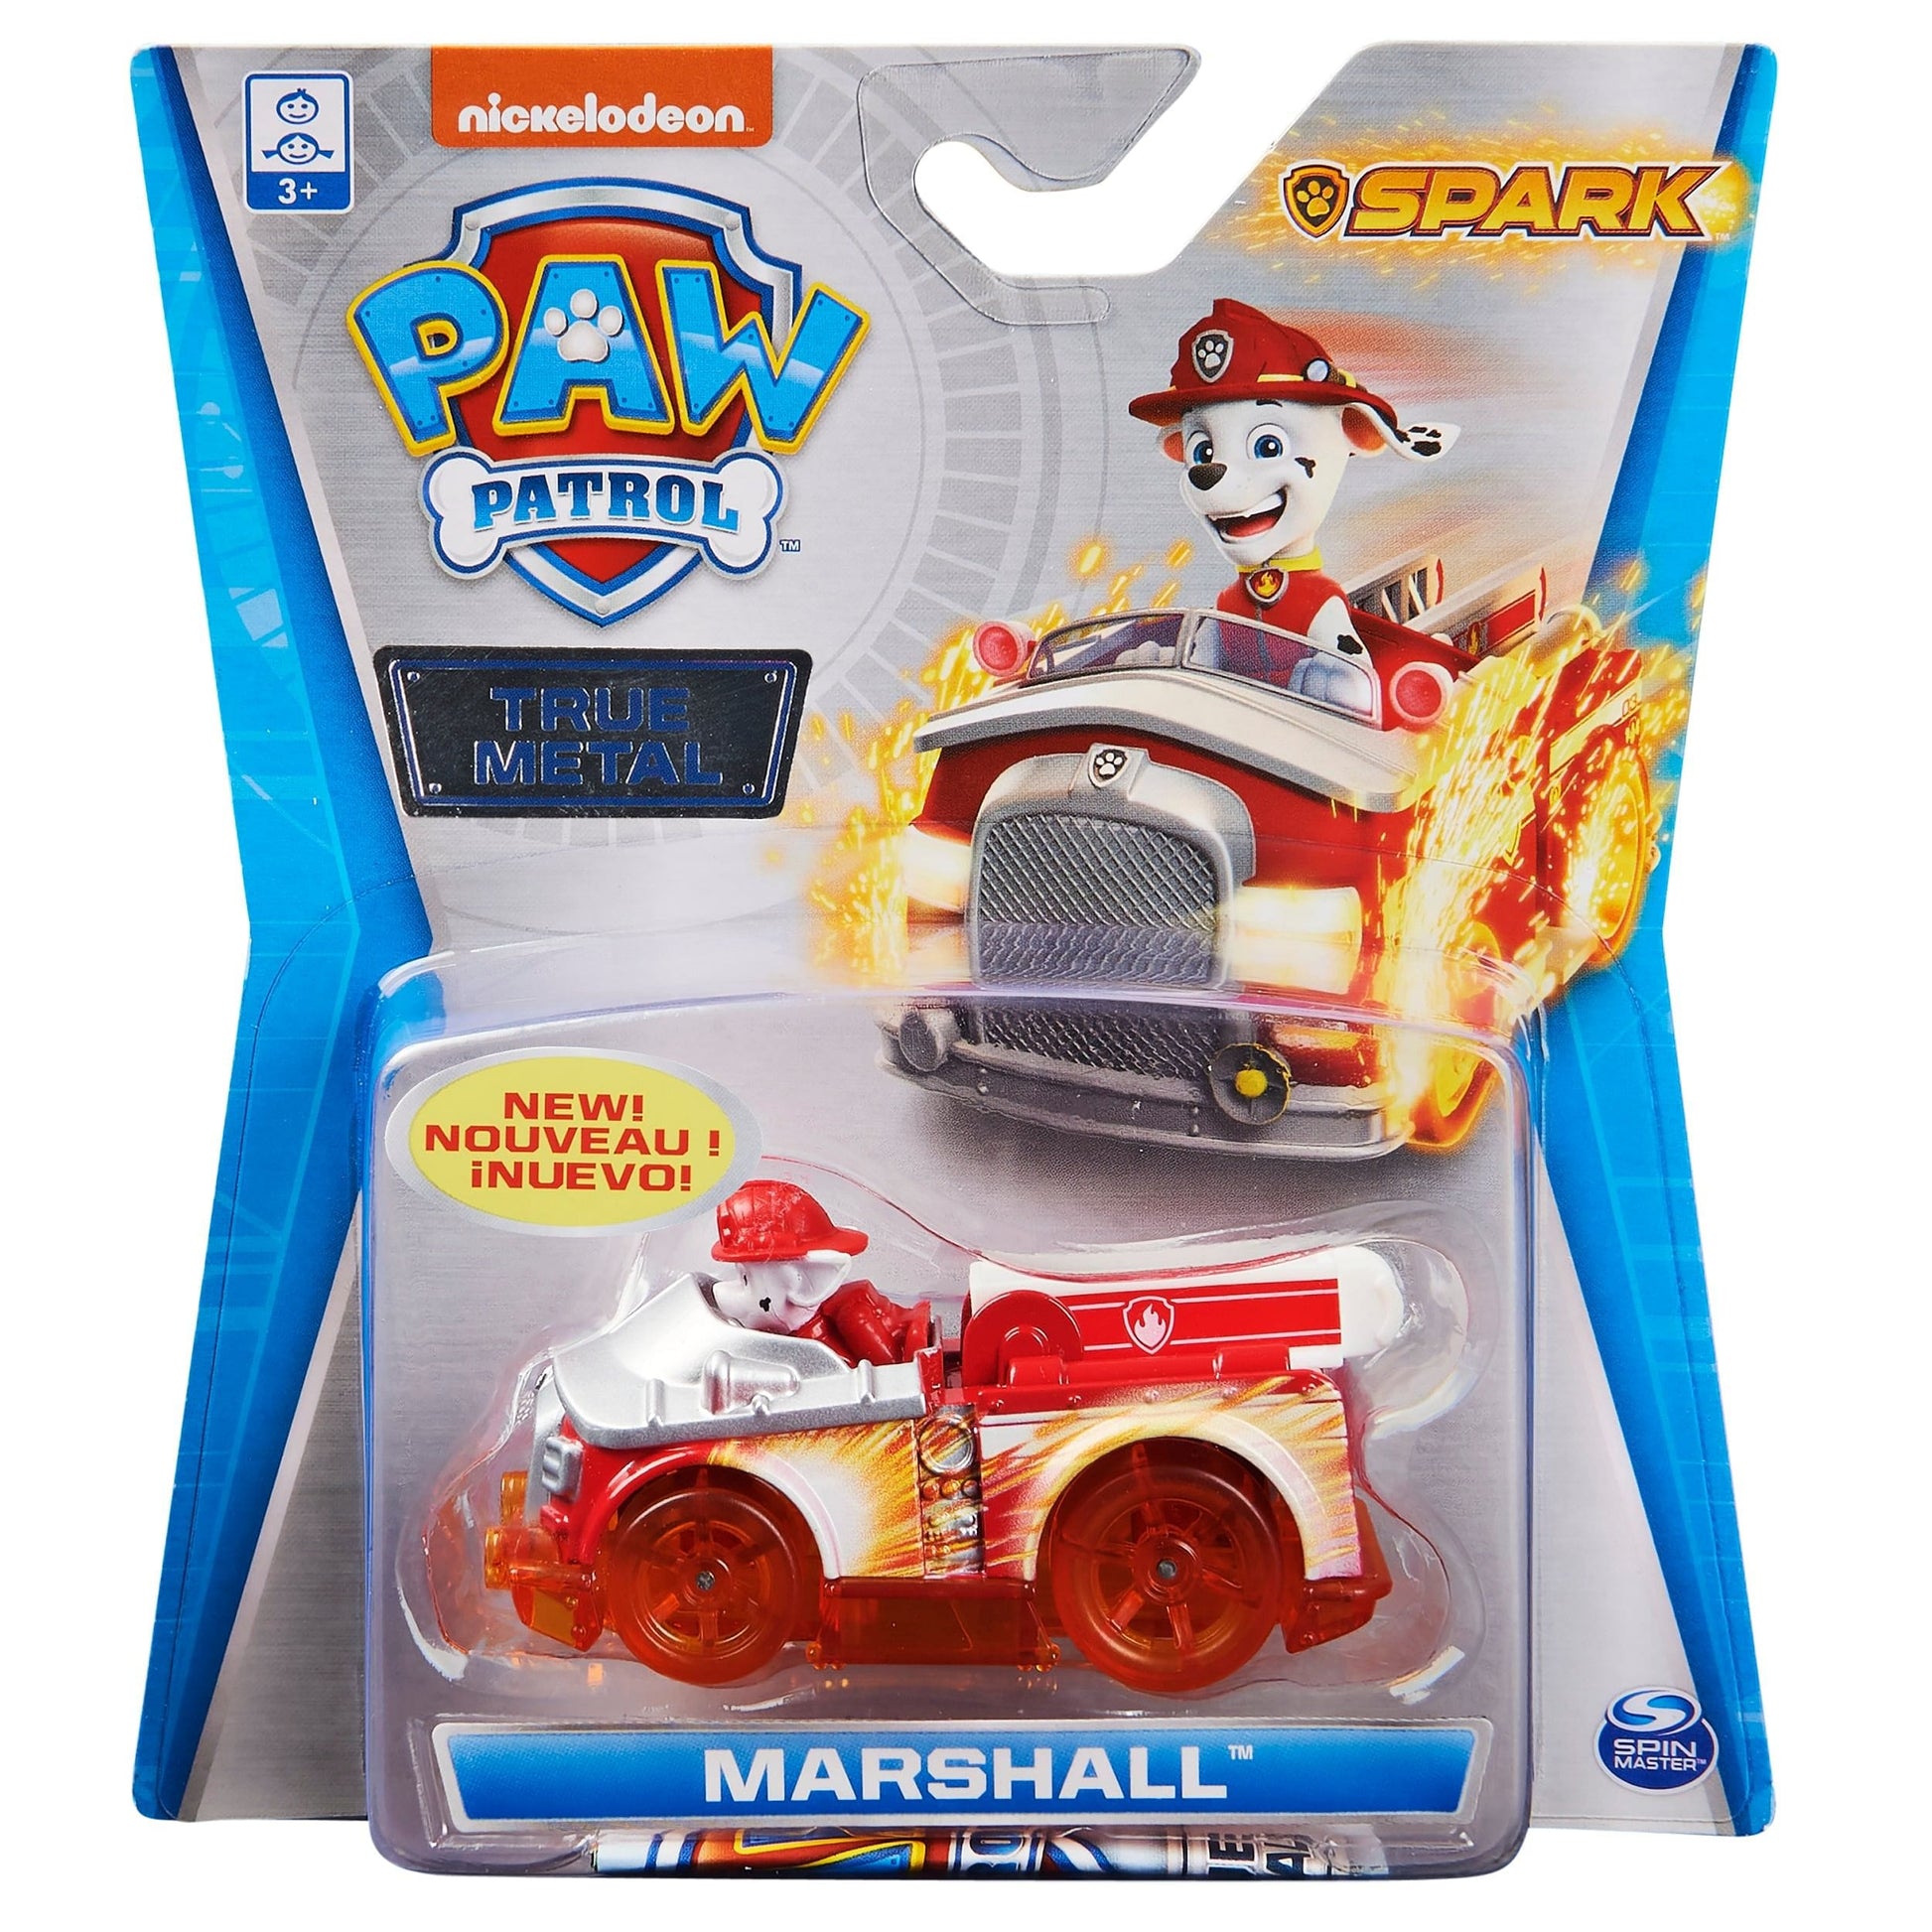 Paw Patrol Metal Die-Cast Vehicle -  Spark - Marshall - Shelburne Country Store